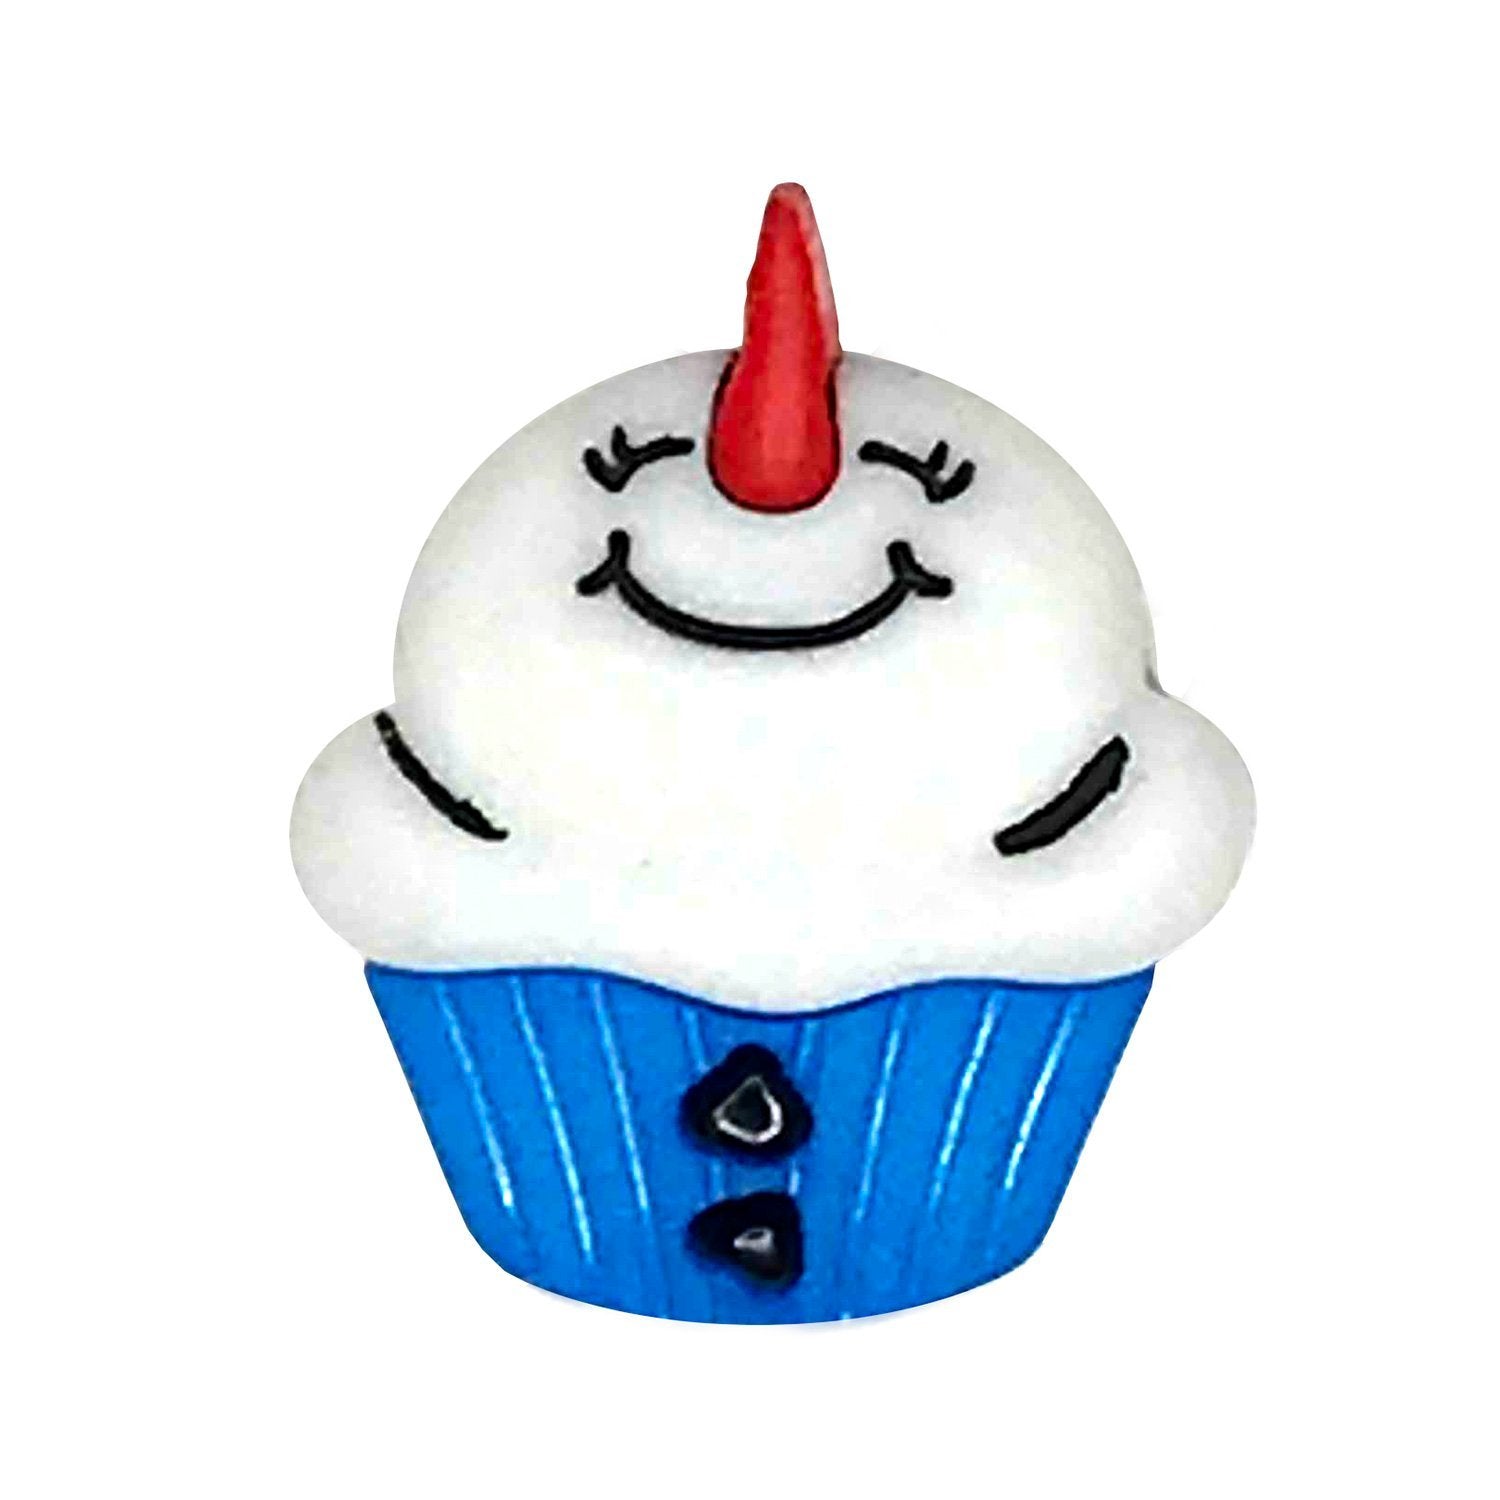 Snowman Cupcake - Buttons Galore and More